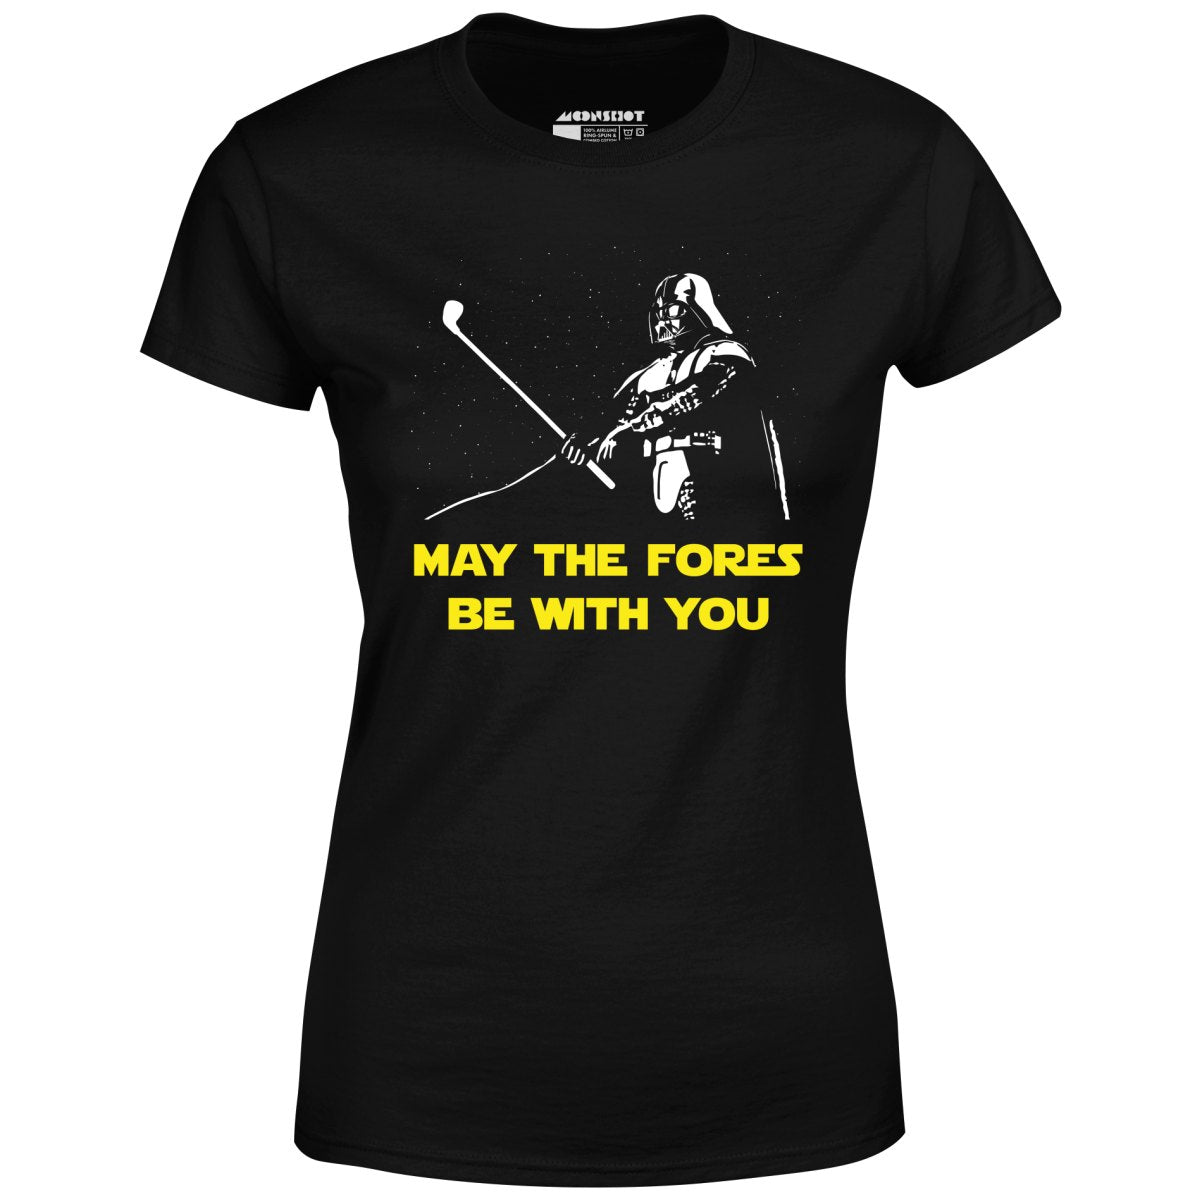 May The Fores Be With You - Women's T-Shirt